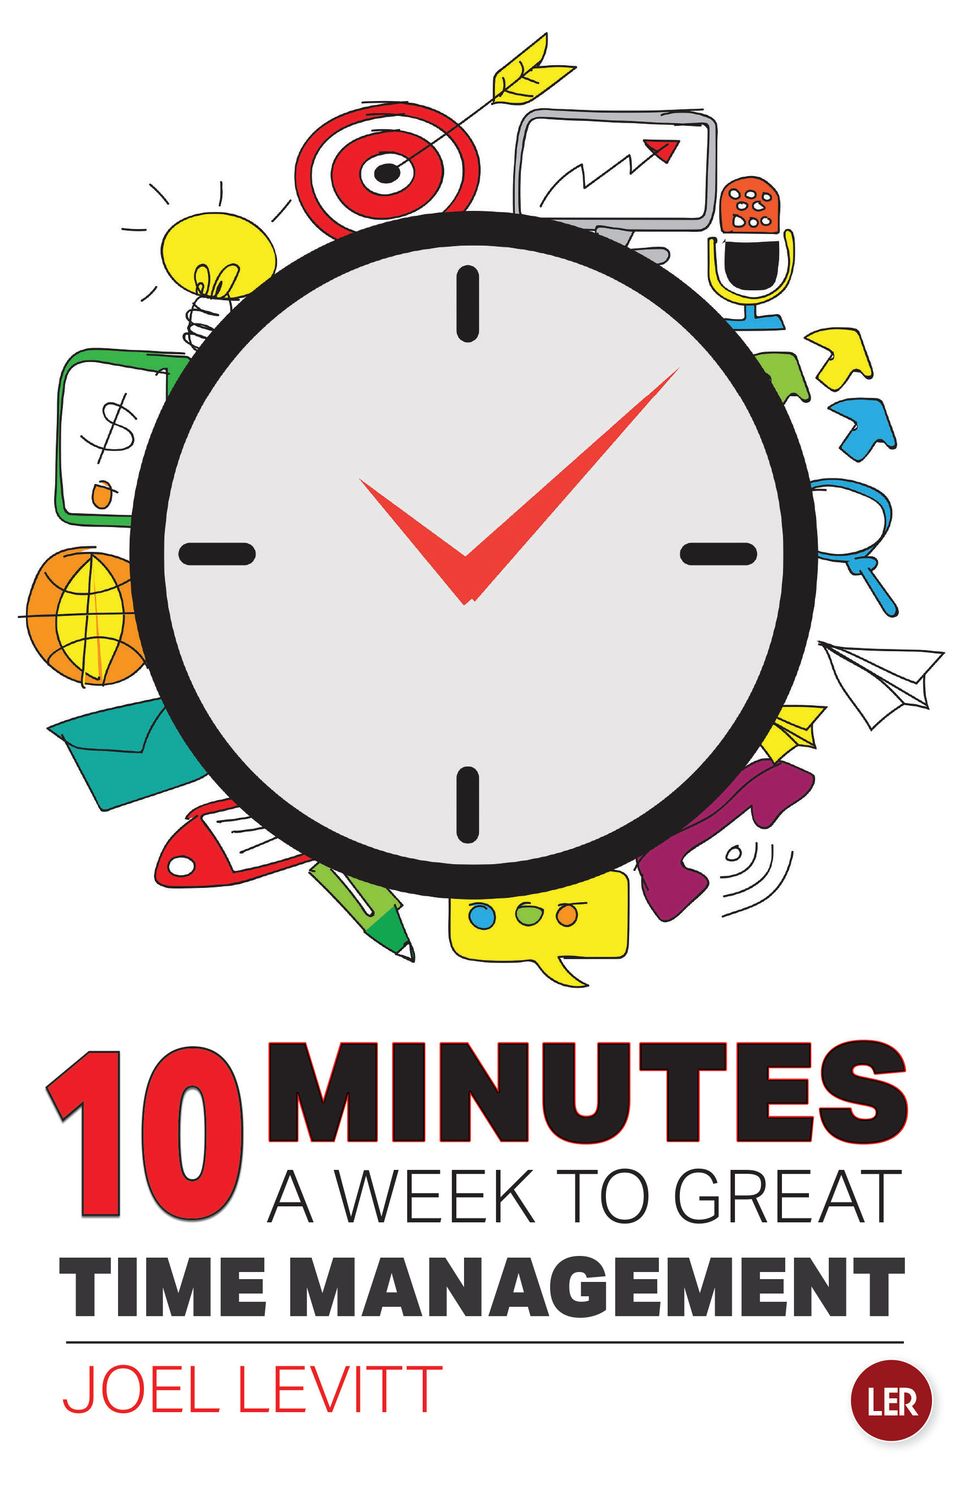  10 Minutes a Week to Great Time Management  